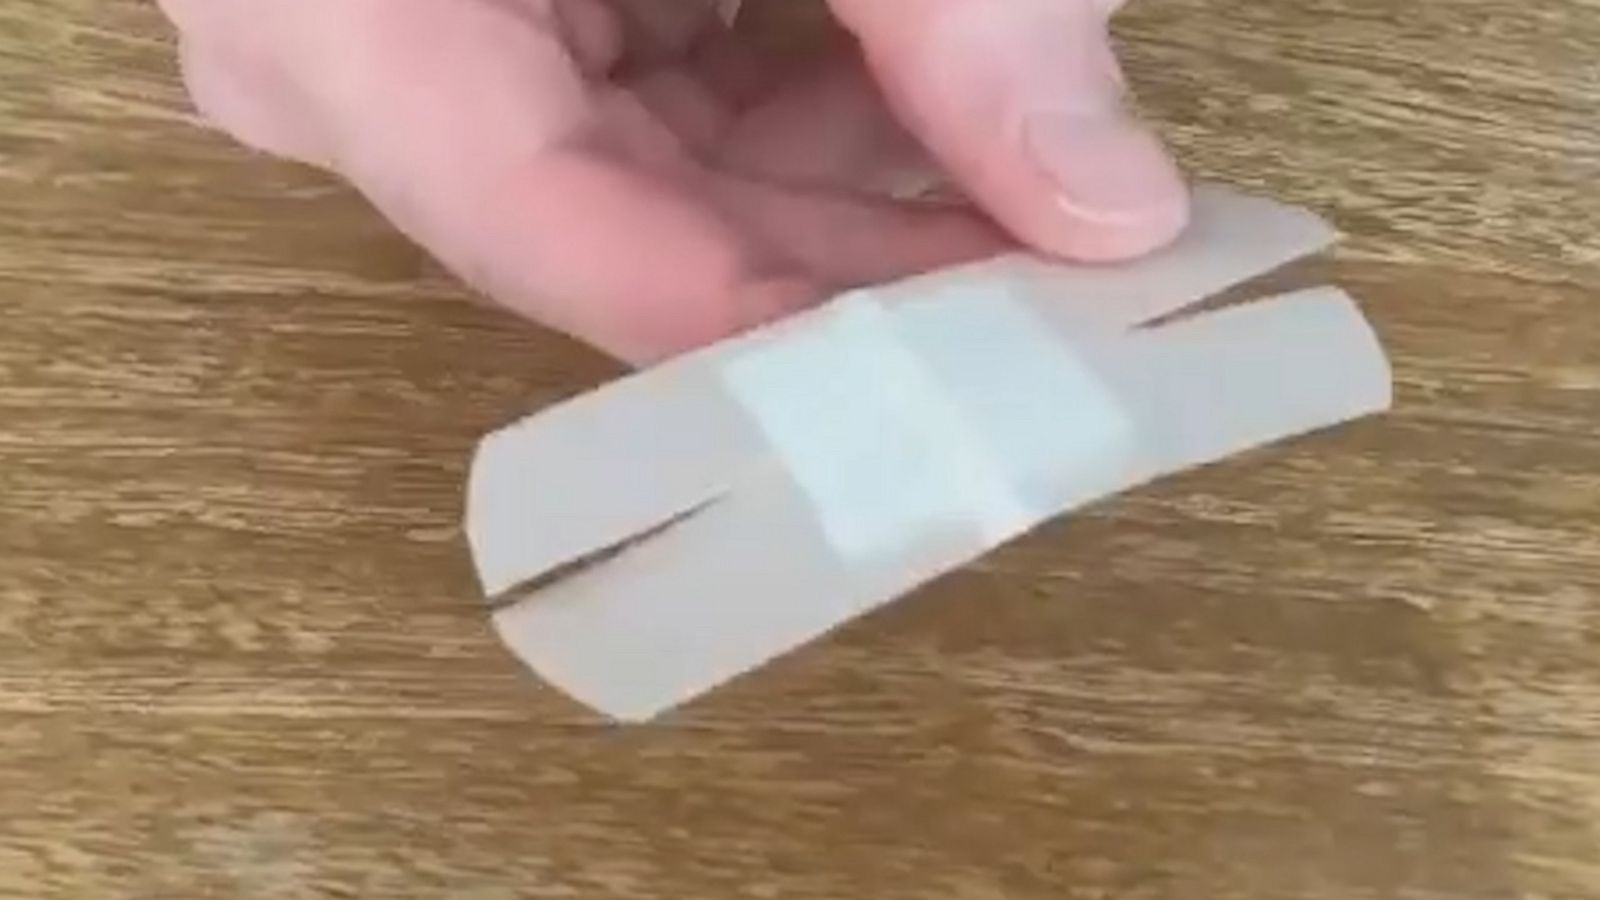 VIDEO: This mom has a genius Band-Aid hack